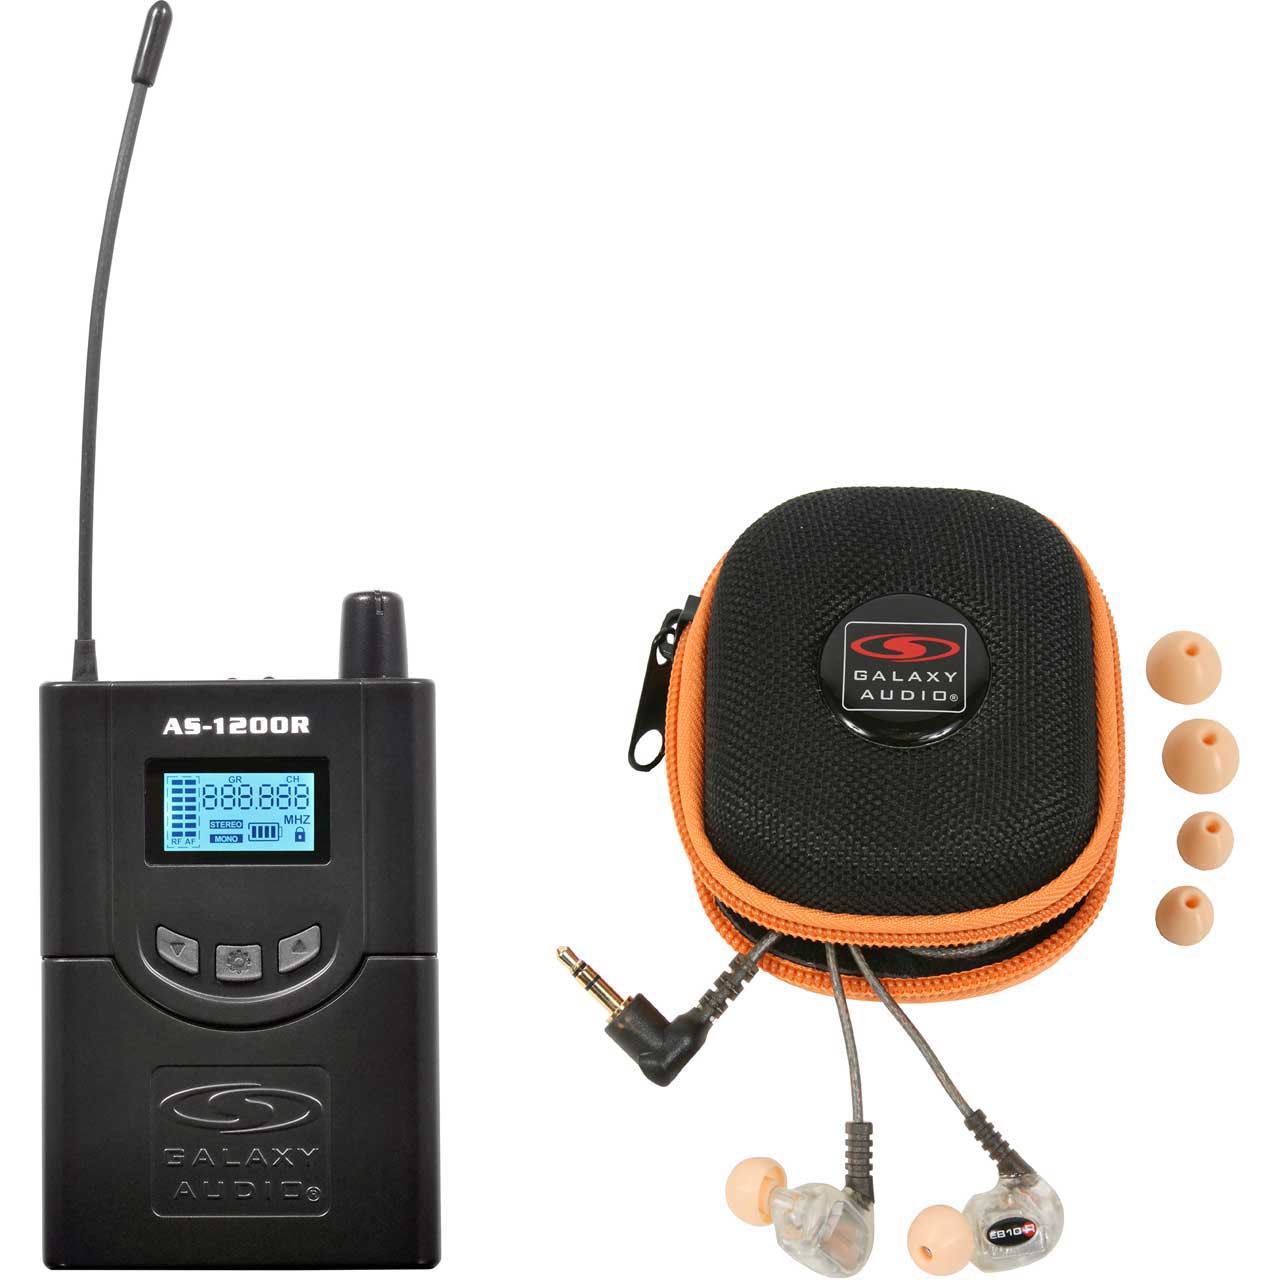 Galaxy Audio AS-1210RD 210 Channel Stereo Wireless Personal In-Ear Monitor Receiver with EB10 Earbuds - 584-607 MHz AS-1210RD